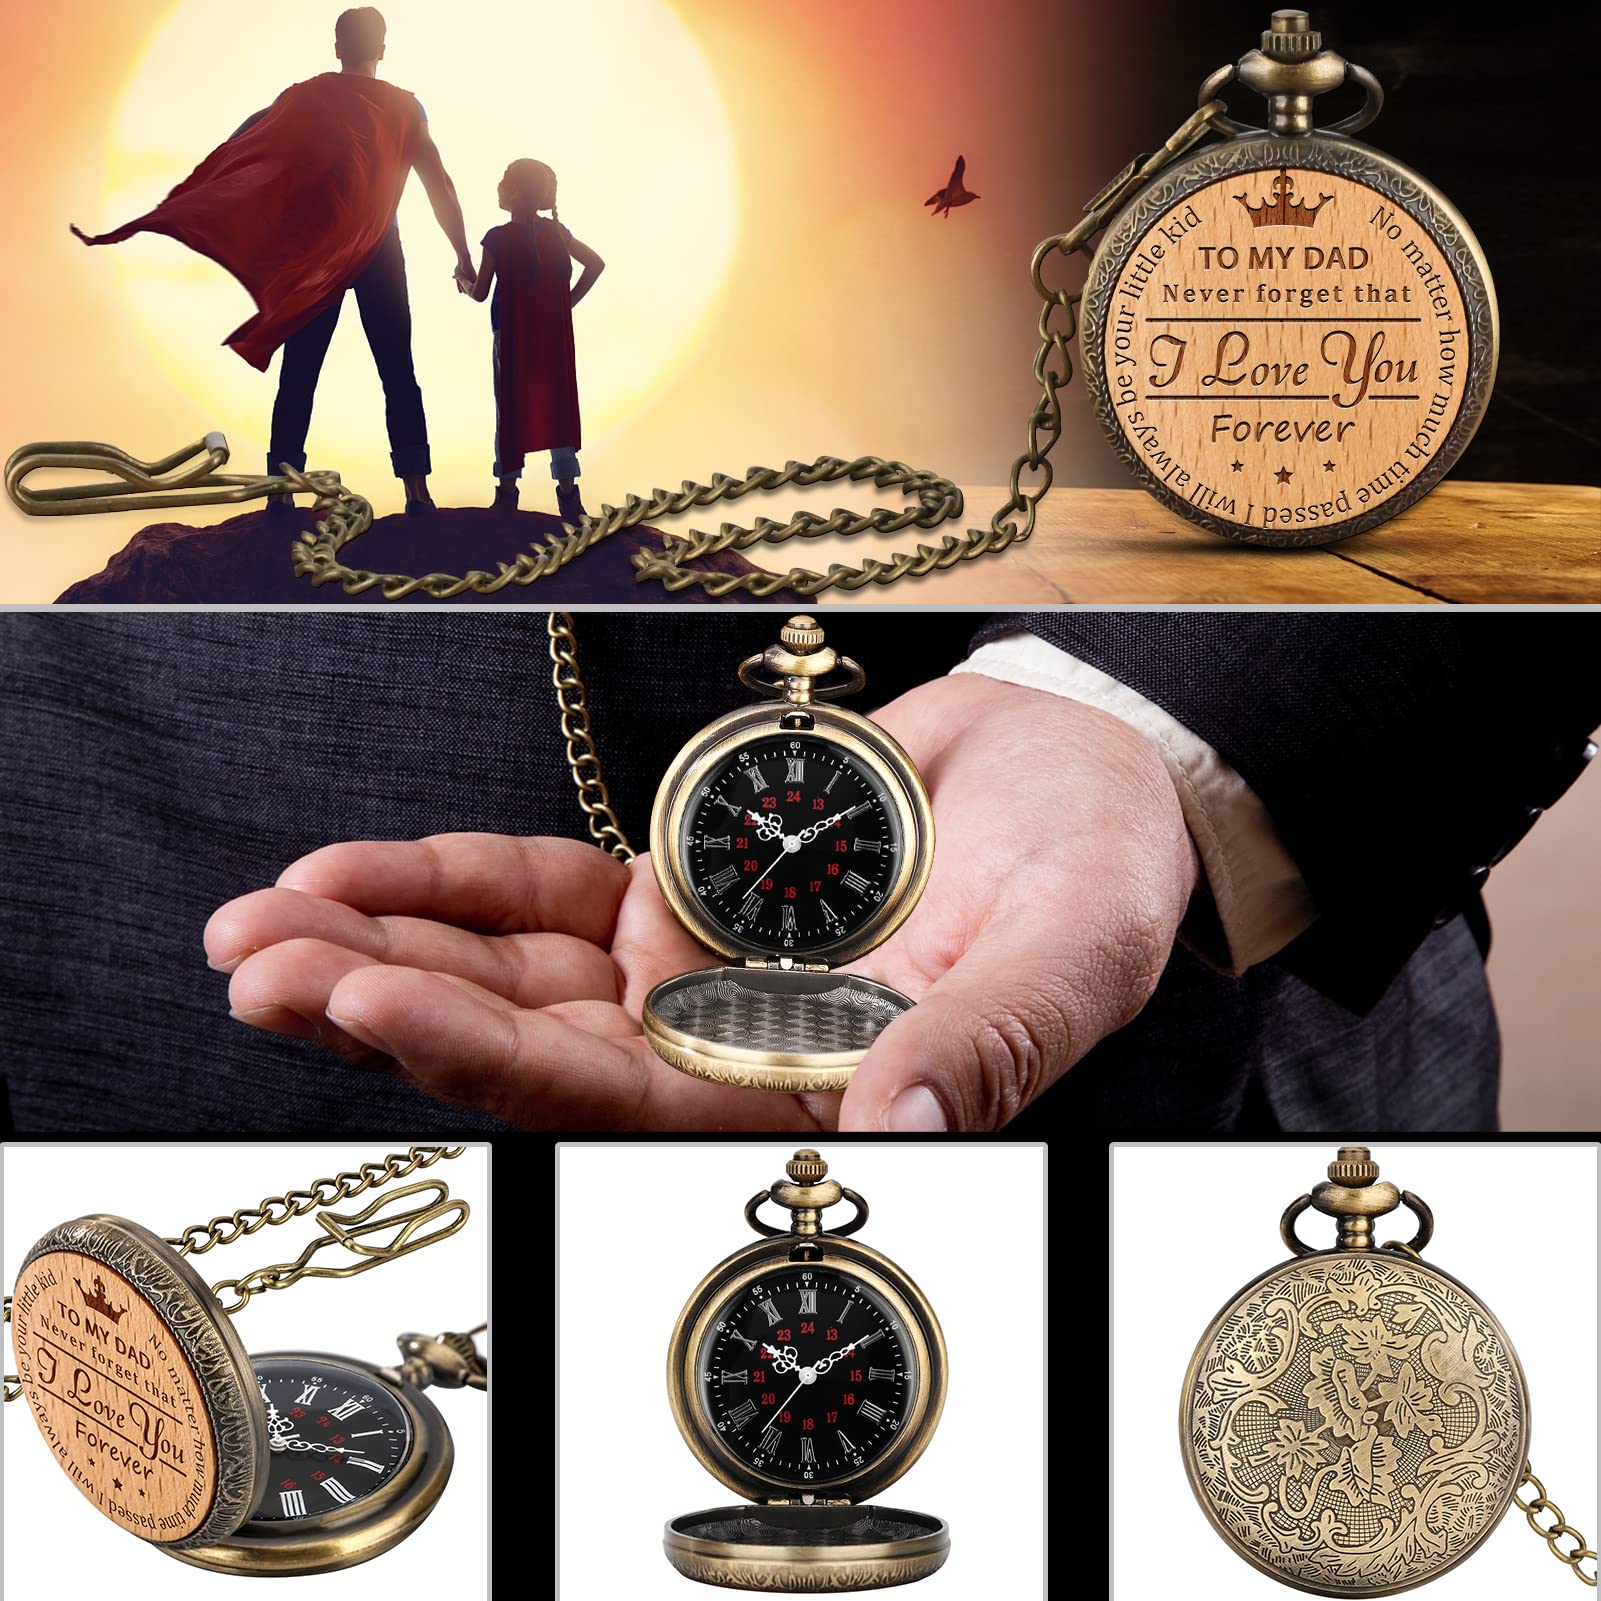 YISUYA Engraved Antique Personalized Pocket Watch and Chain Steampunk Fob Vintage Pocket Watches for Men Souvenirs Birthday Gifts for Men, to My Dad, to My Son